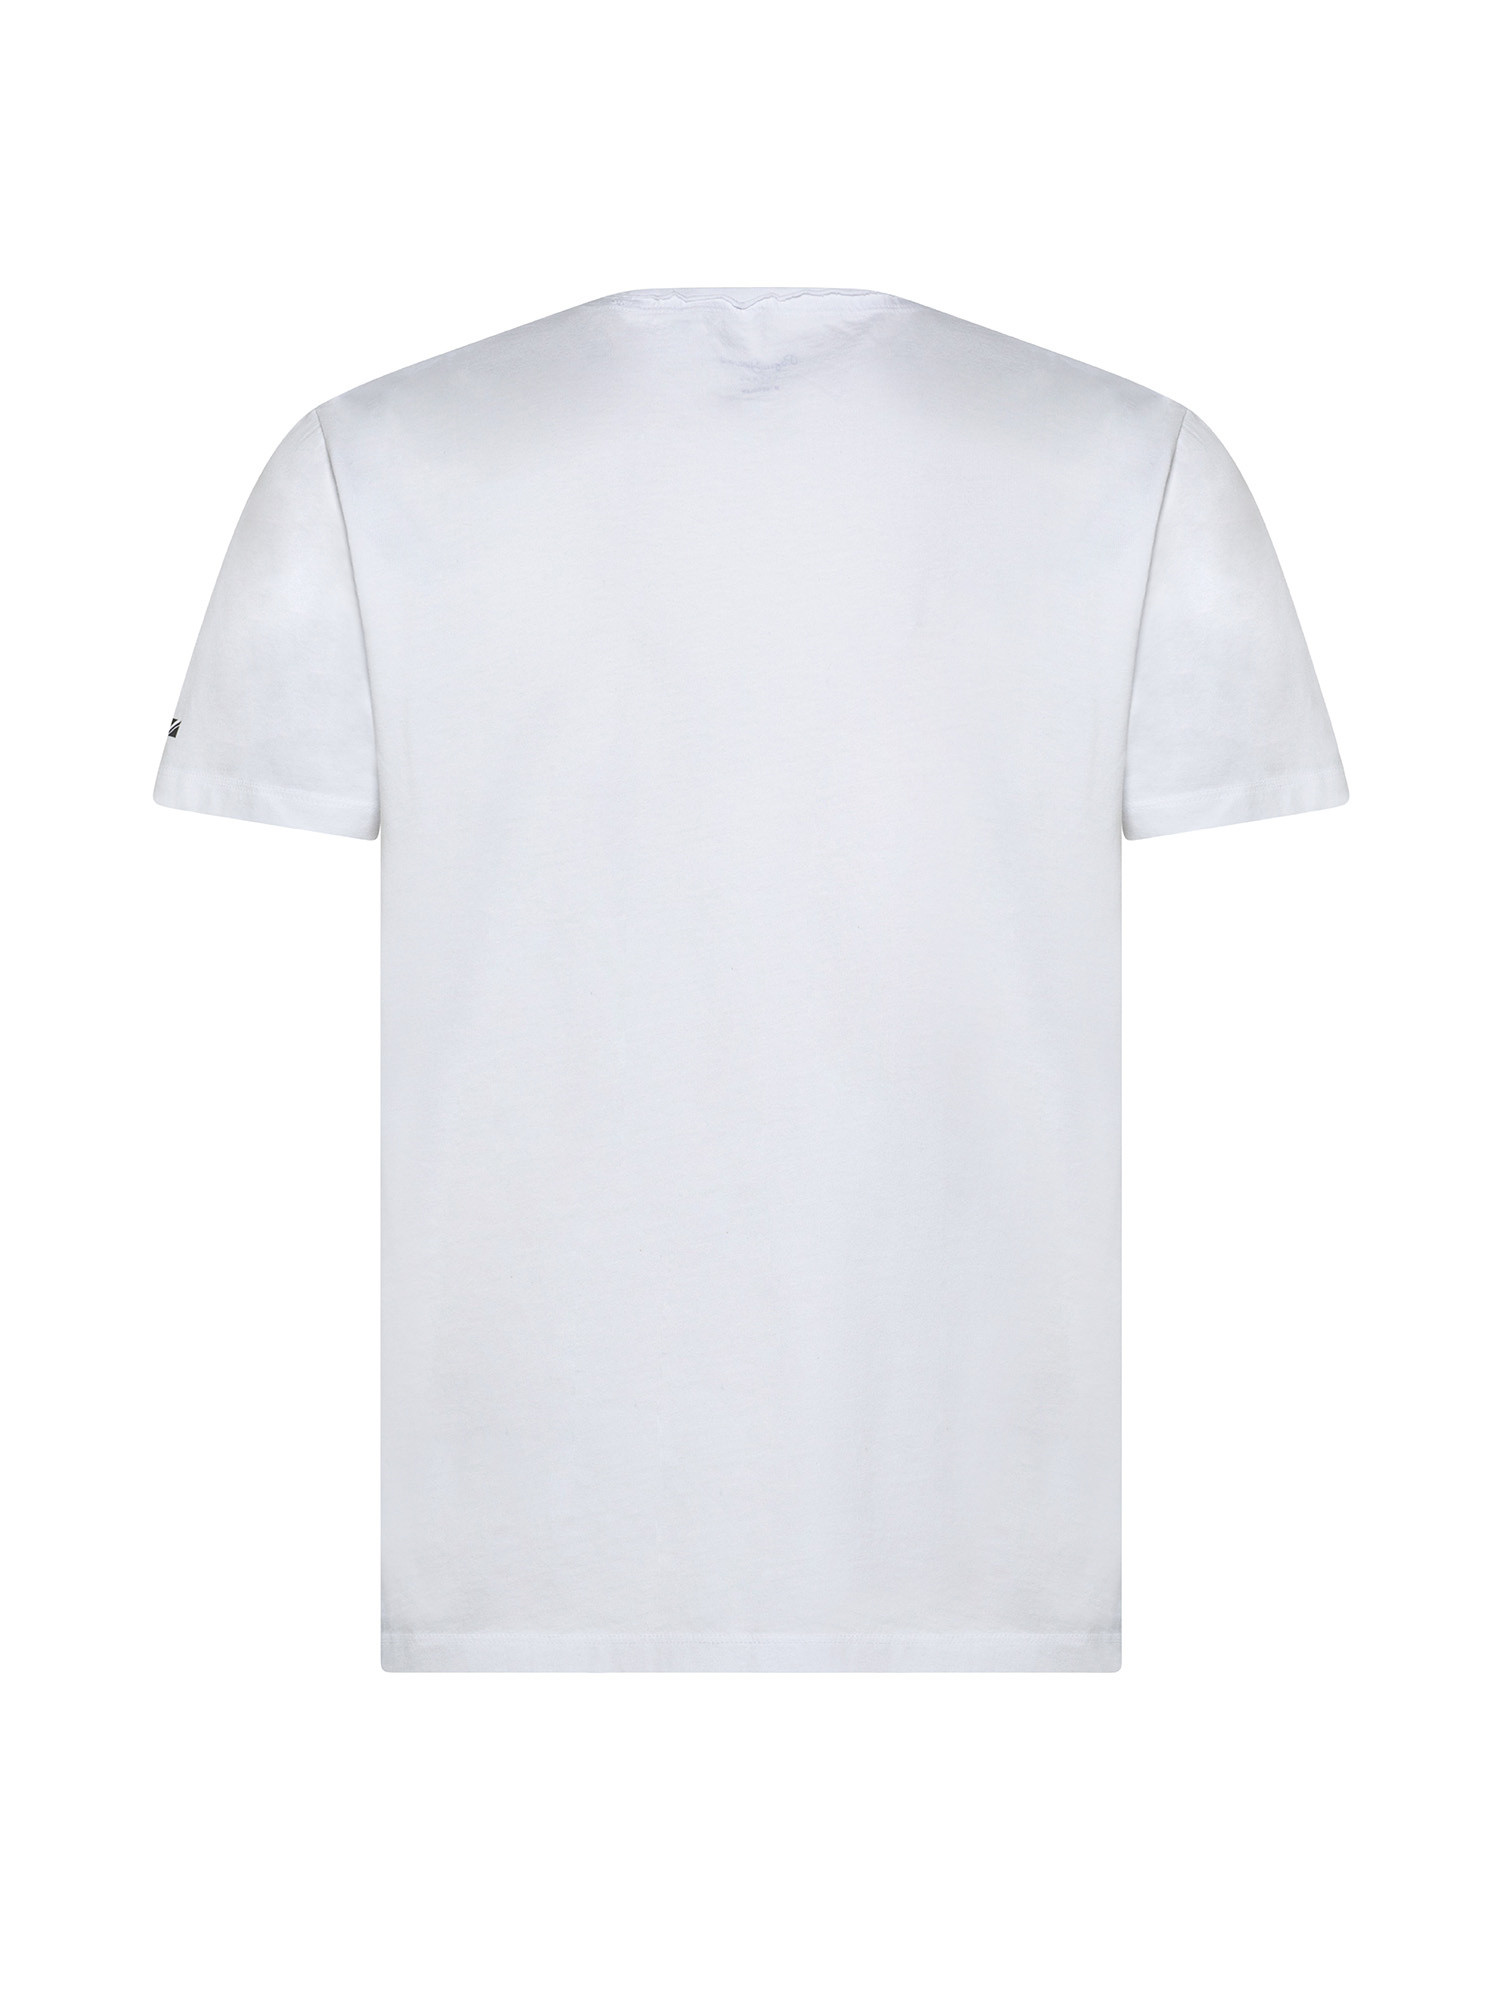 Jersey T-shirt with print, White, large image number 1